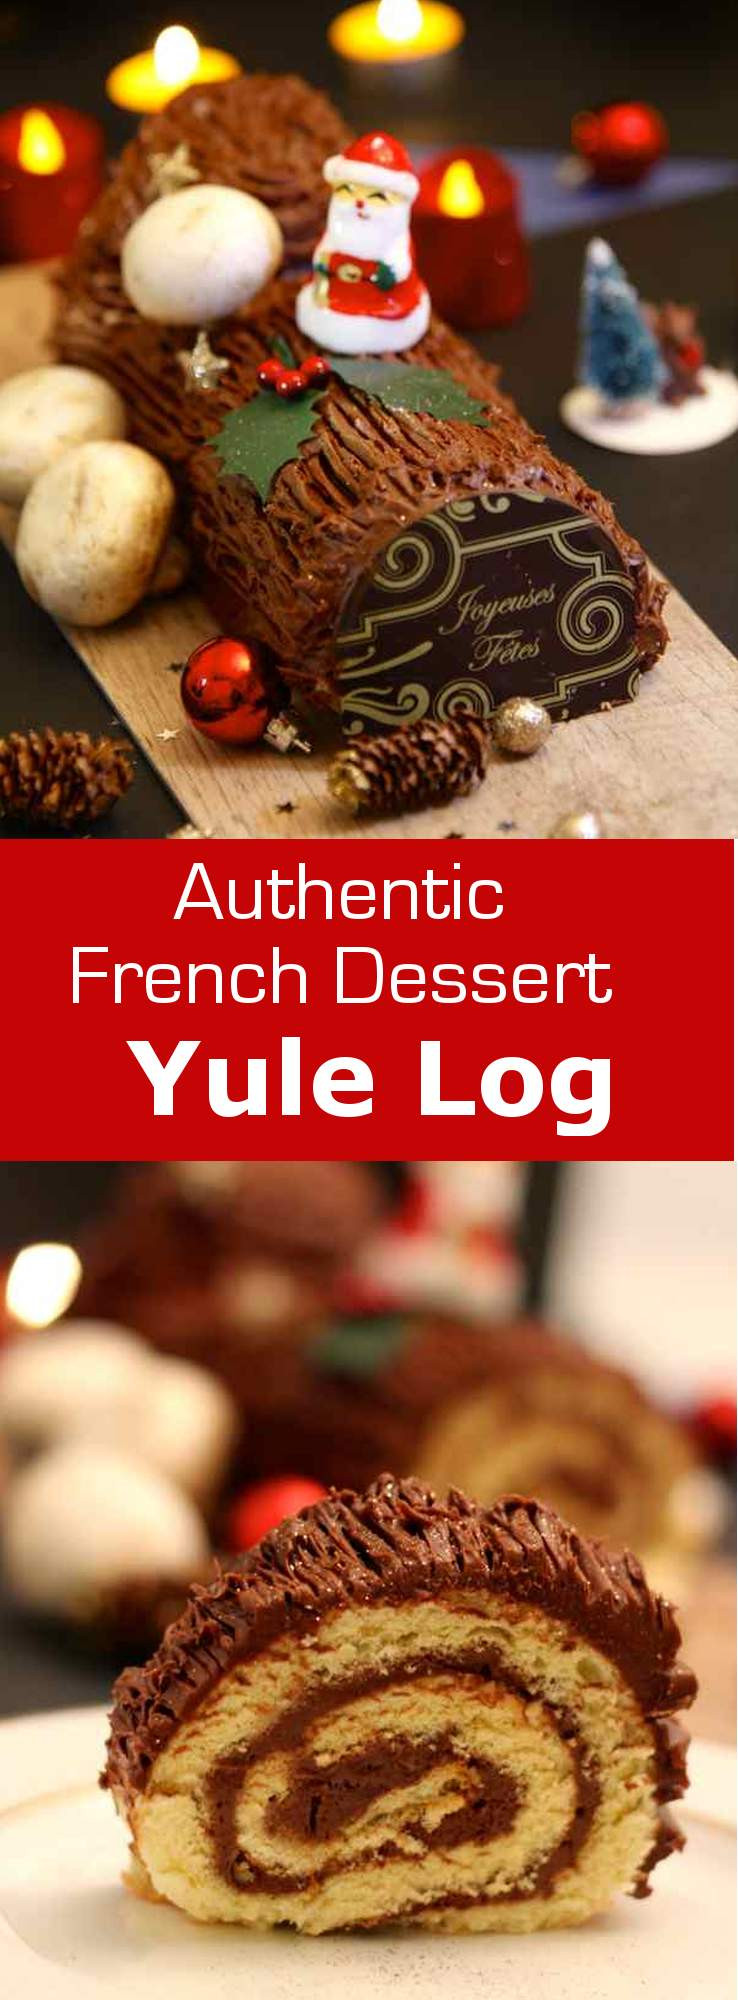 Traditional Christmas Desserts
 Chocolate Yule Log Authentic French Recipe